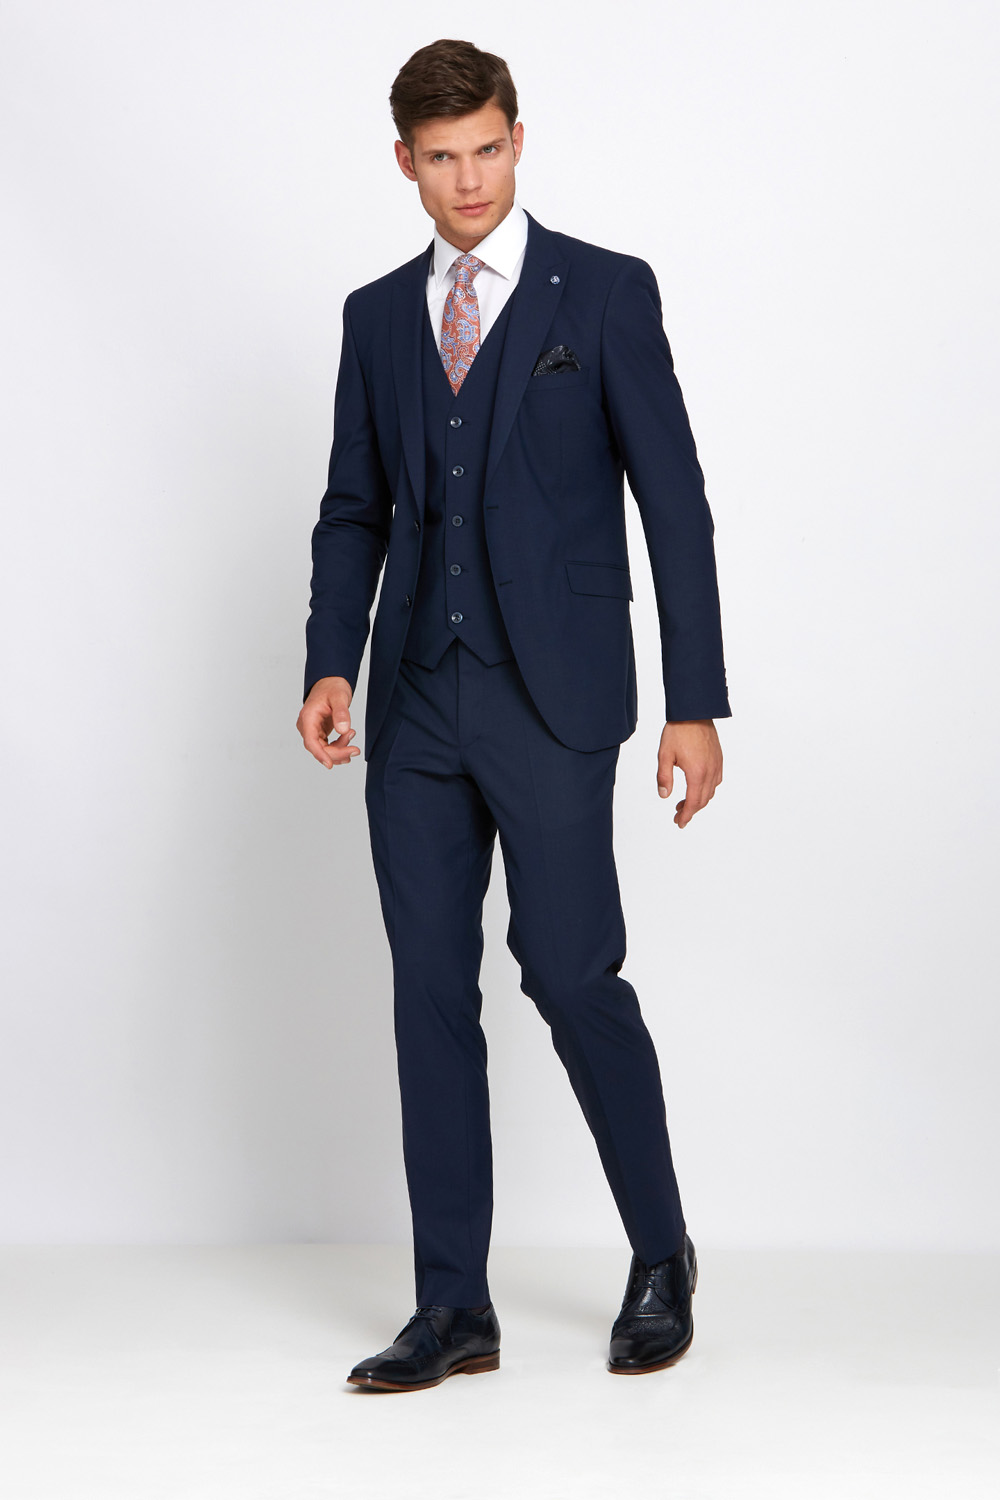 Franklin Navy 3 Piece Suit - Tom Murphy's Formal and Menswear